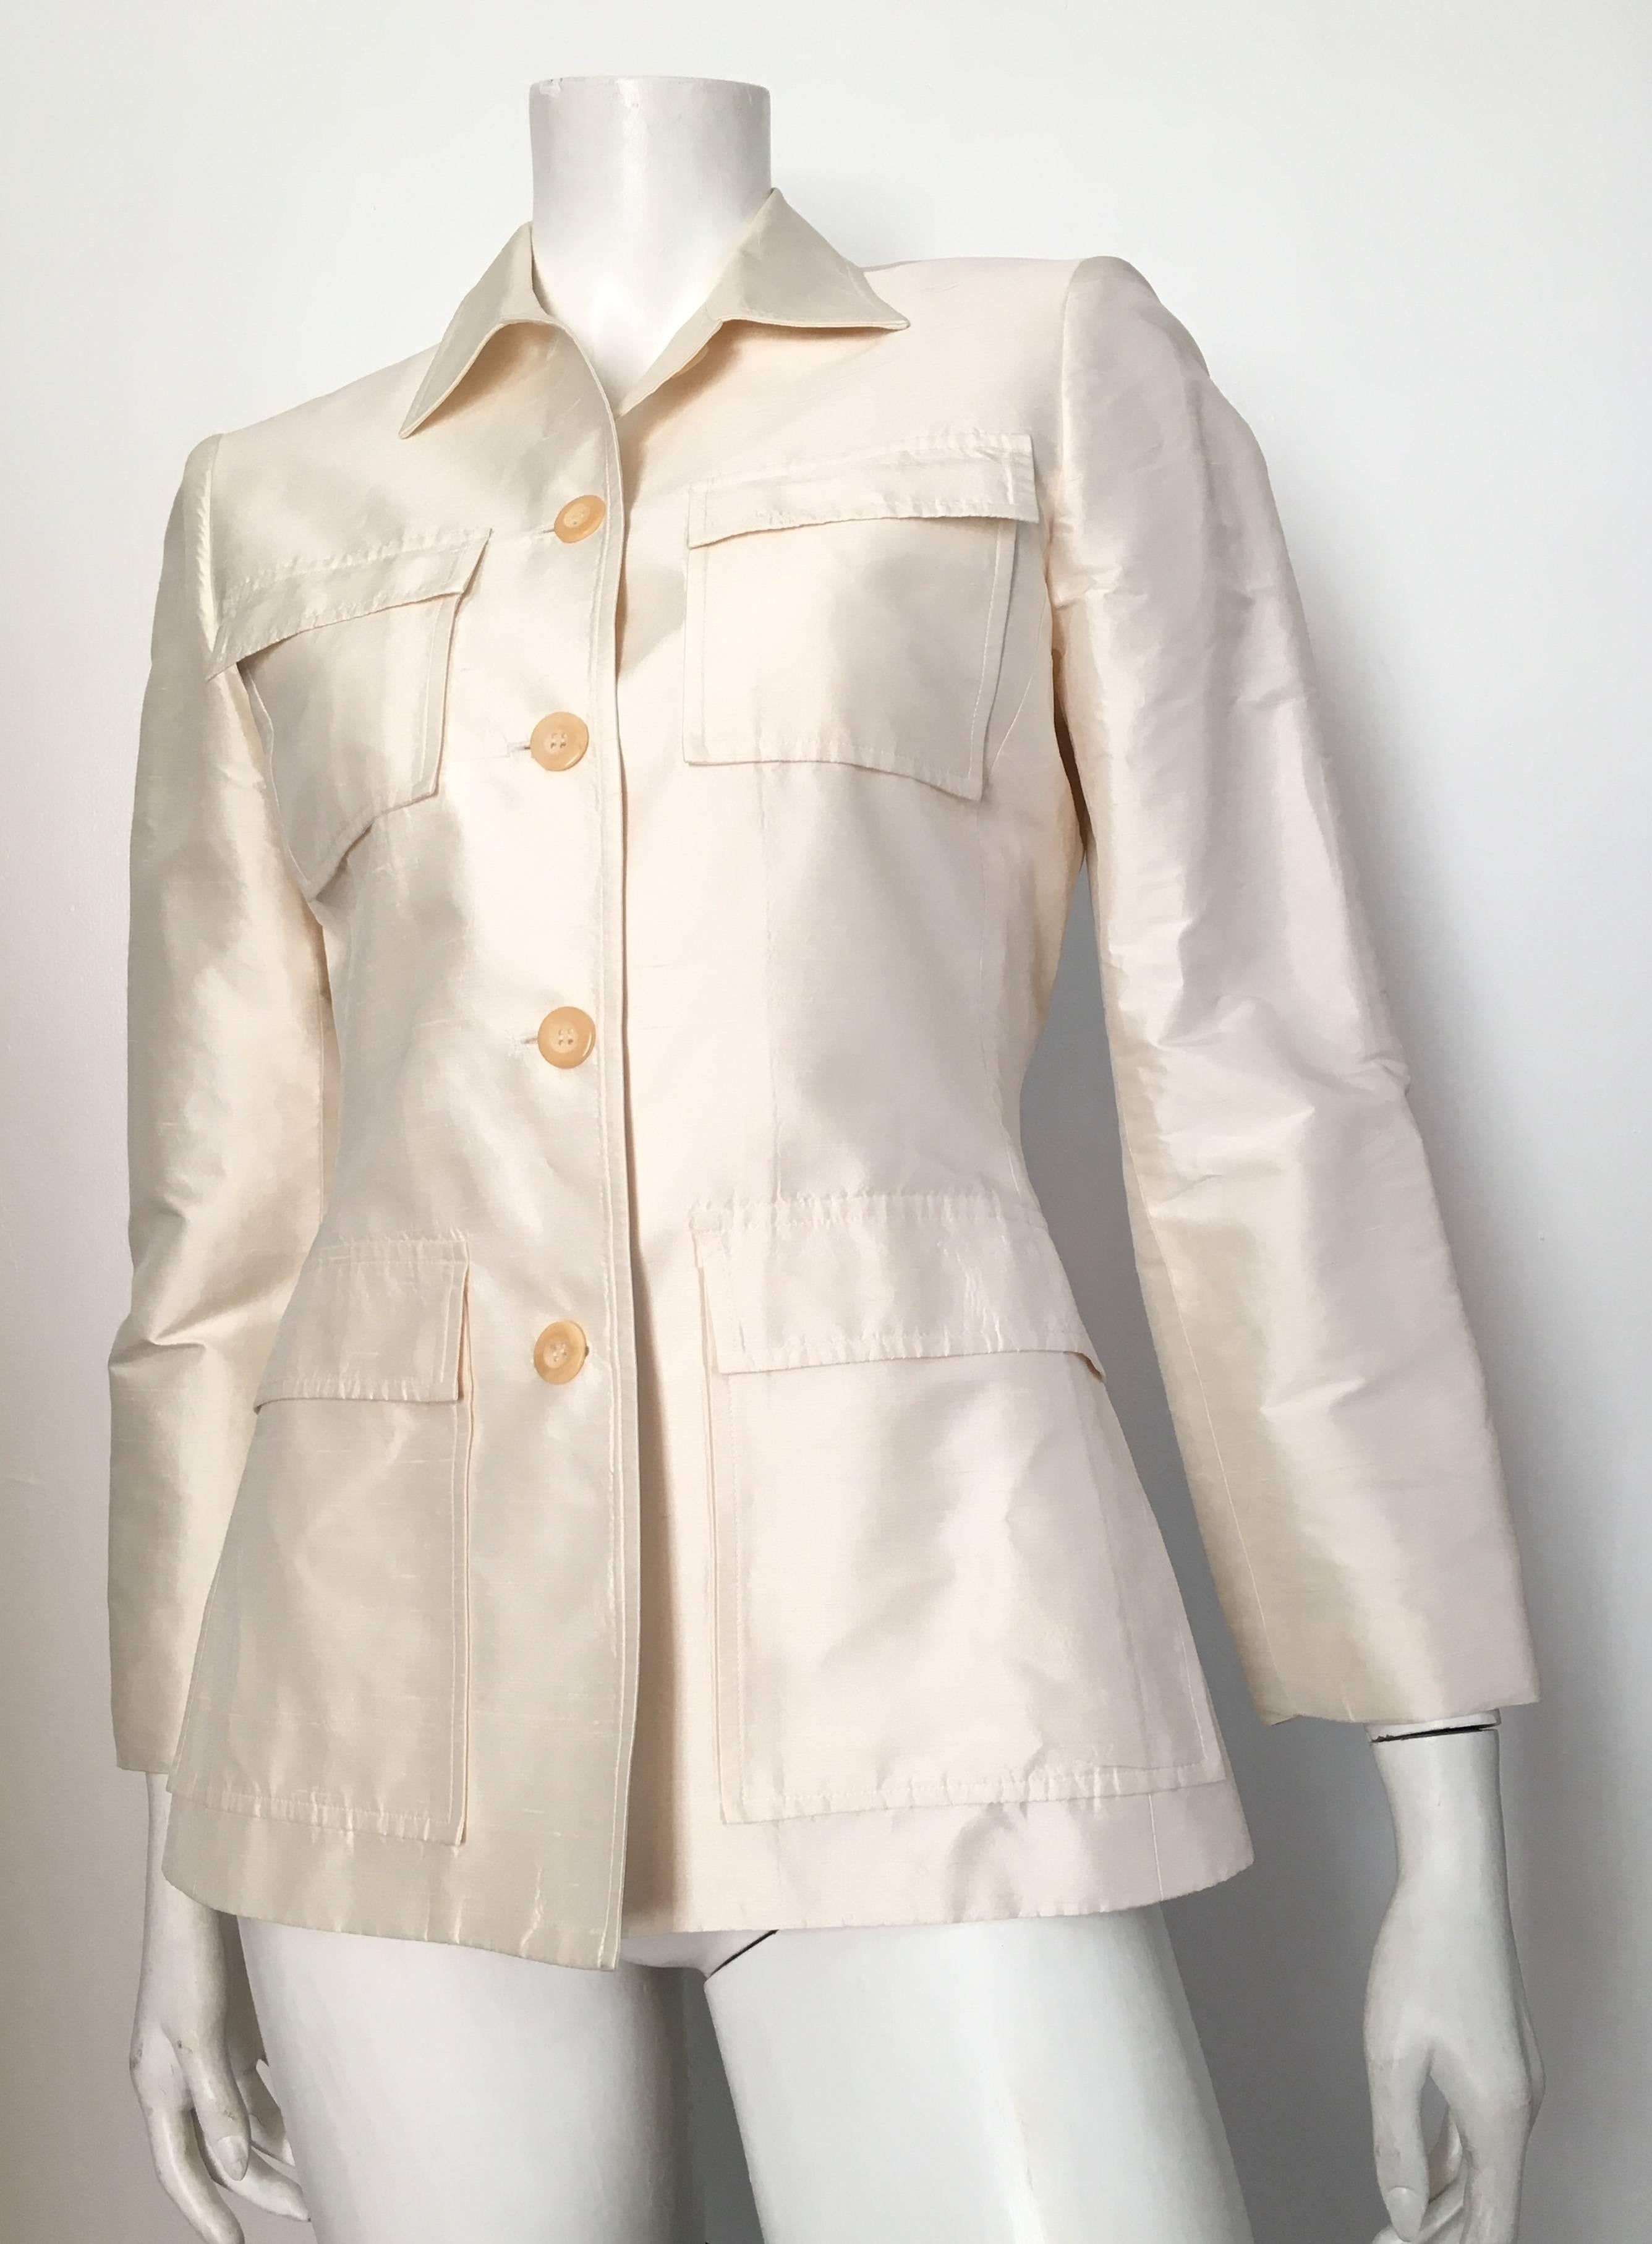 Oscar de la Renta white silk button up evening jacket is a size 6.  Ladies please grab your best friend, Mr. Tape Measure, so you can properly measure your bust, waistline & sleeves to make sure this lovely piece will fit your lovely body.  There